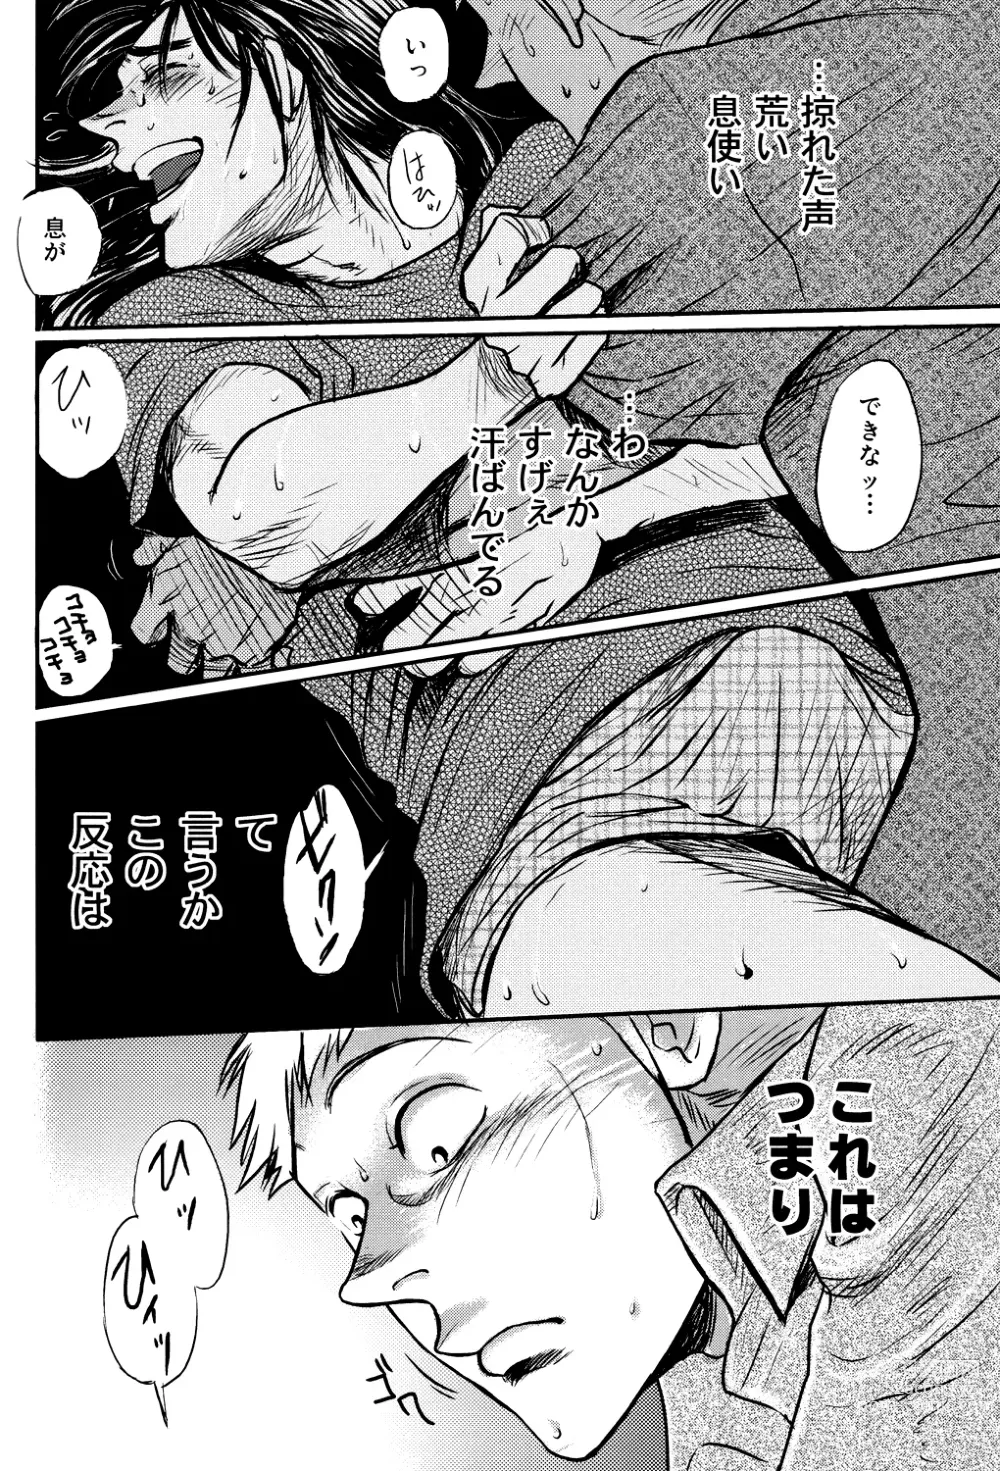 Page 25 of doujinshi Get Up Boys!